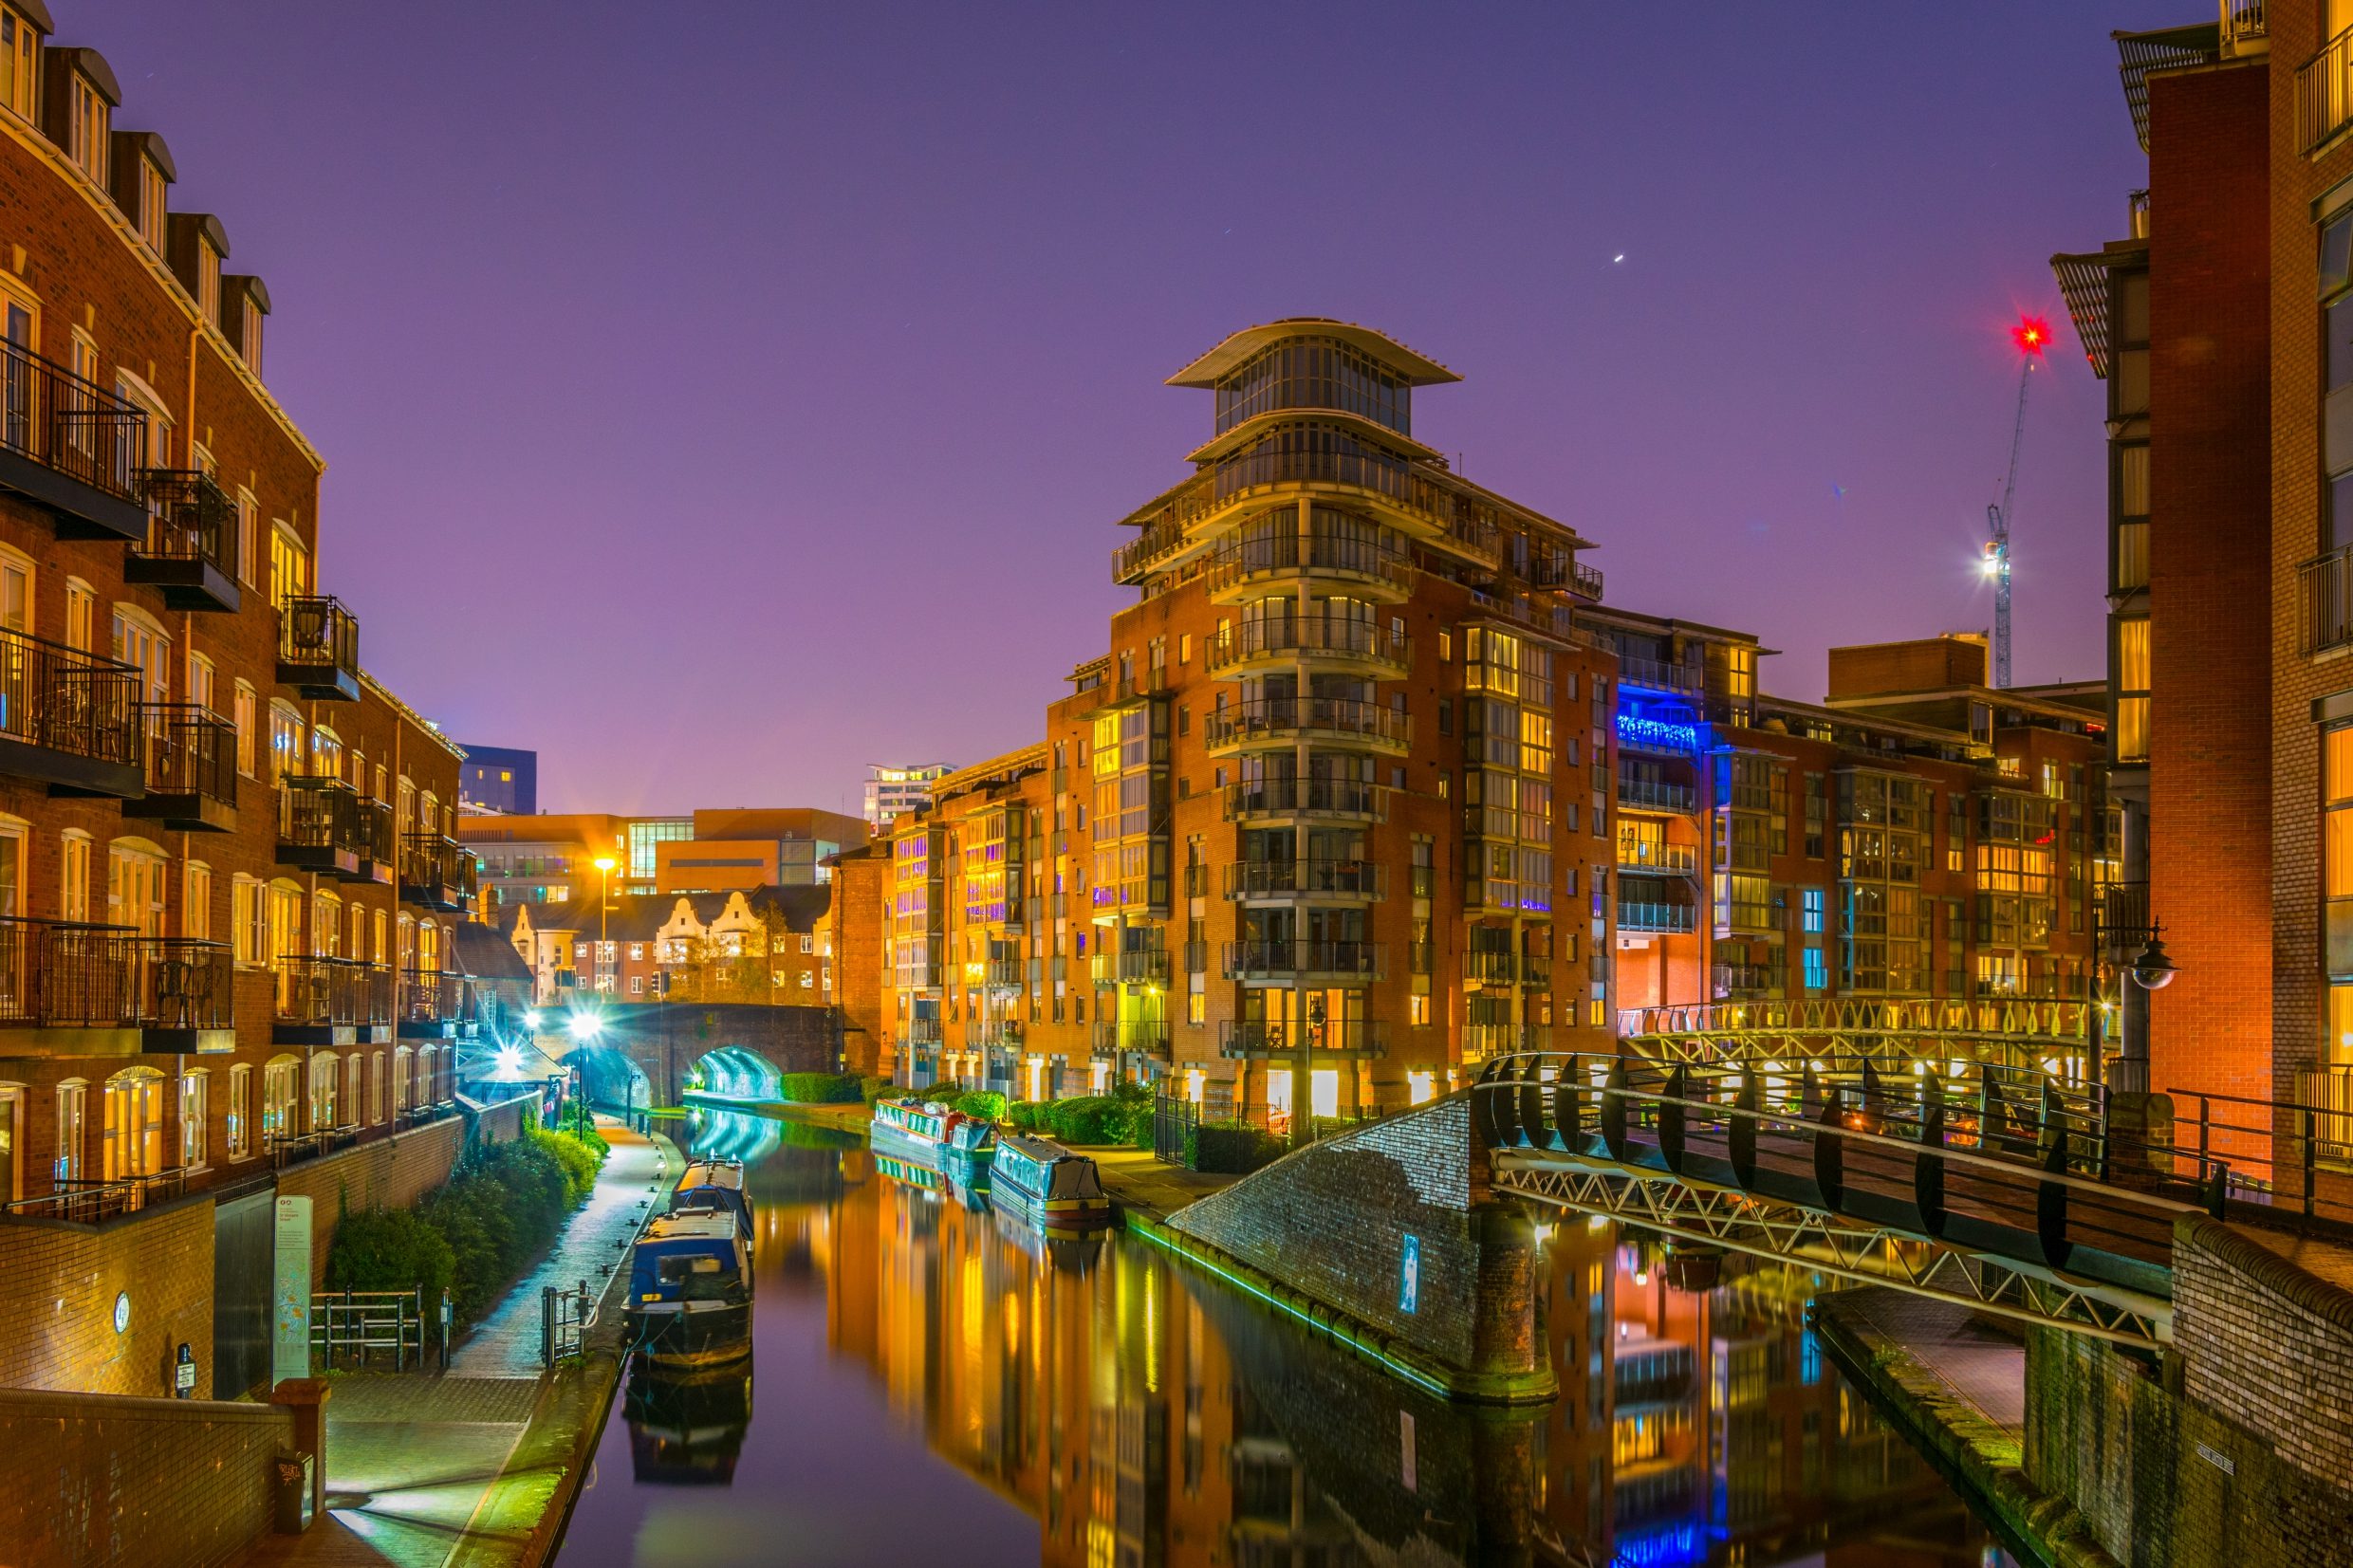 Night view of a canal and buildings in a tranquil city centre